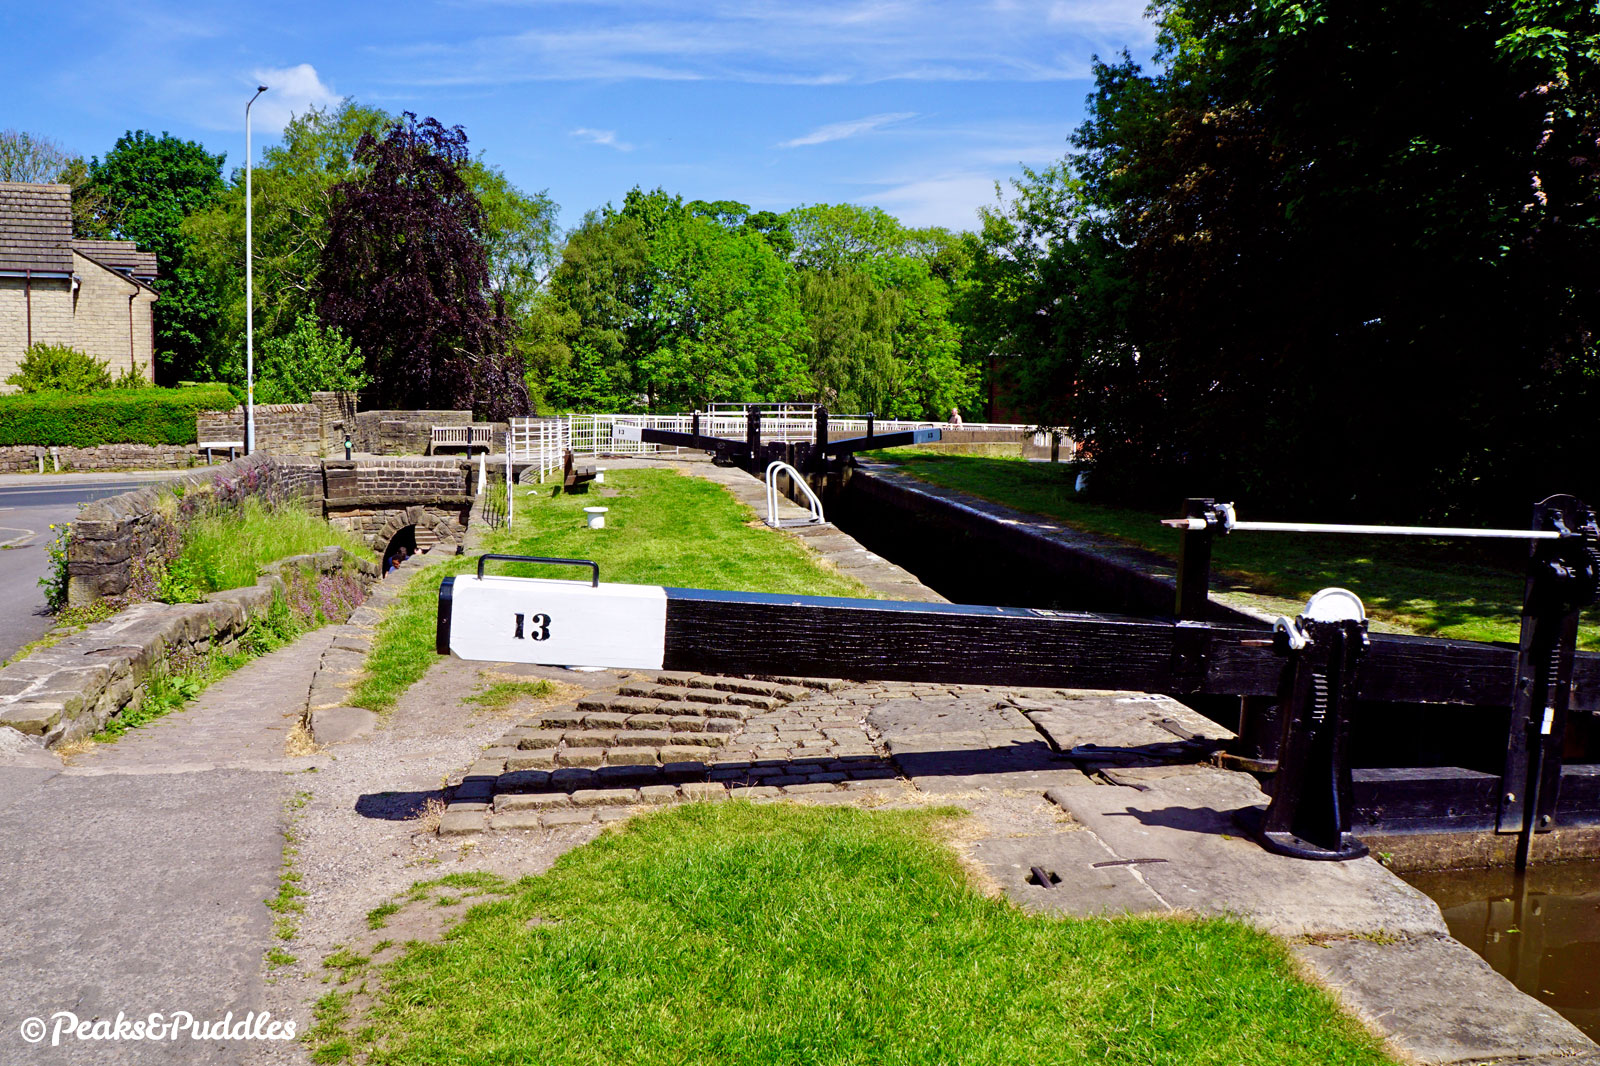 The "Posset Bridge" has arches for the horse tunnel, the main canal below Lock 13 and a blocked-up third arch which once served a branch to Oldknow's Lime Kilns.